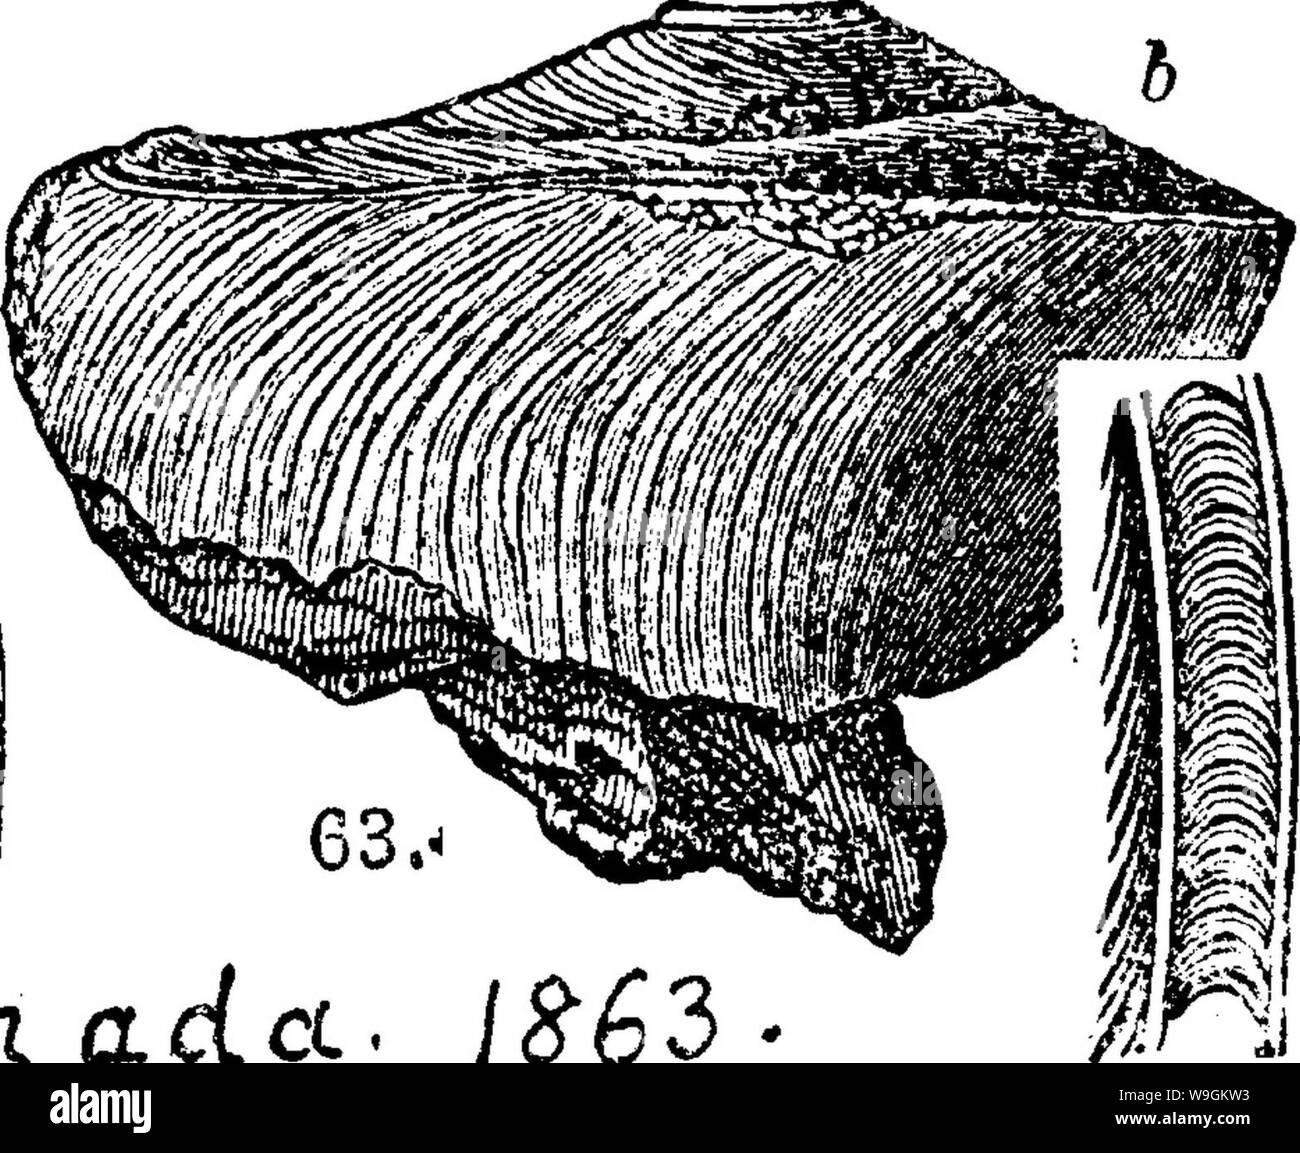 Archive image from page 275 of A dictionary of the fossils Stock Photo